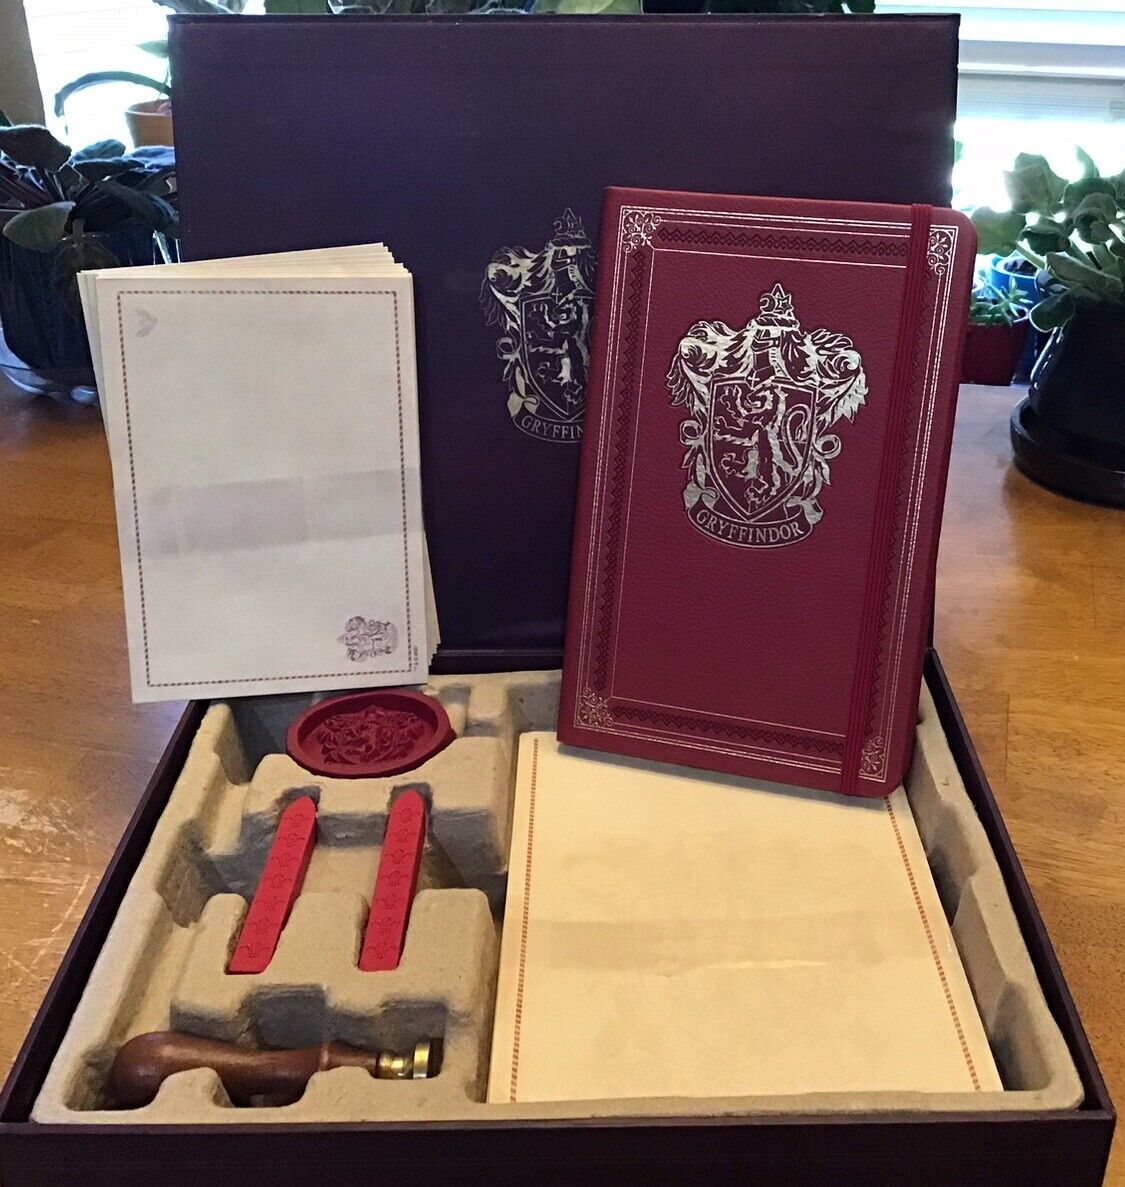 EXTREMELY RARE 2016 HARRY POTTER GRYFFINDOR Journal Wax Seal Very Good condition